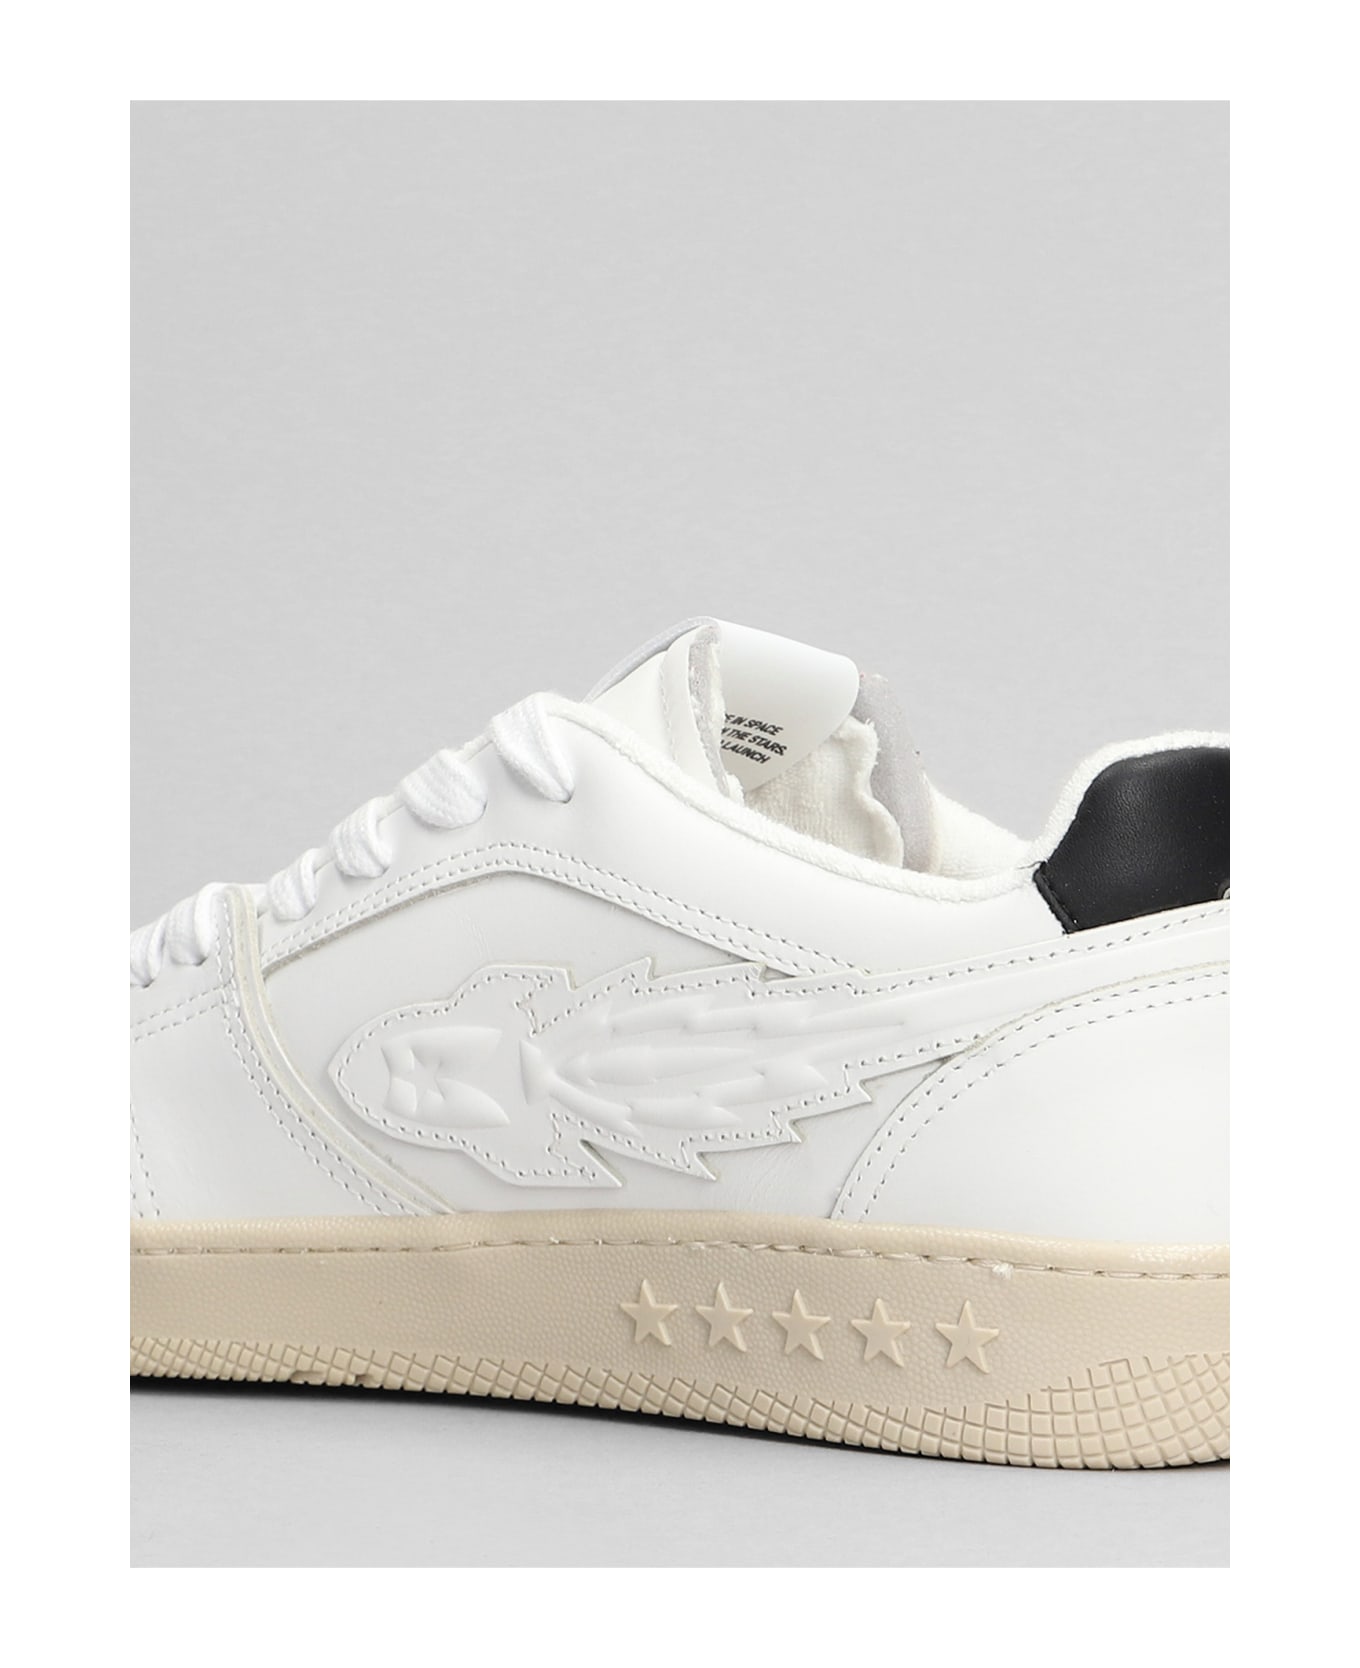 Enterprise Japan Sneakers In White Leather - White